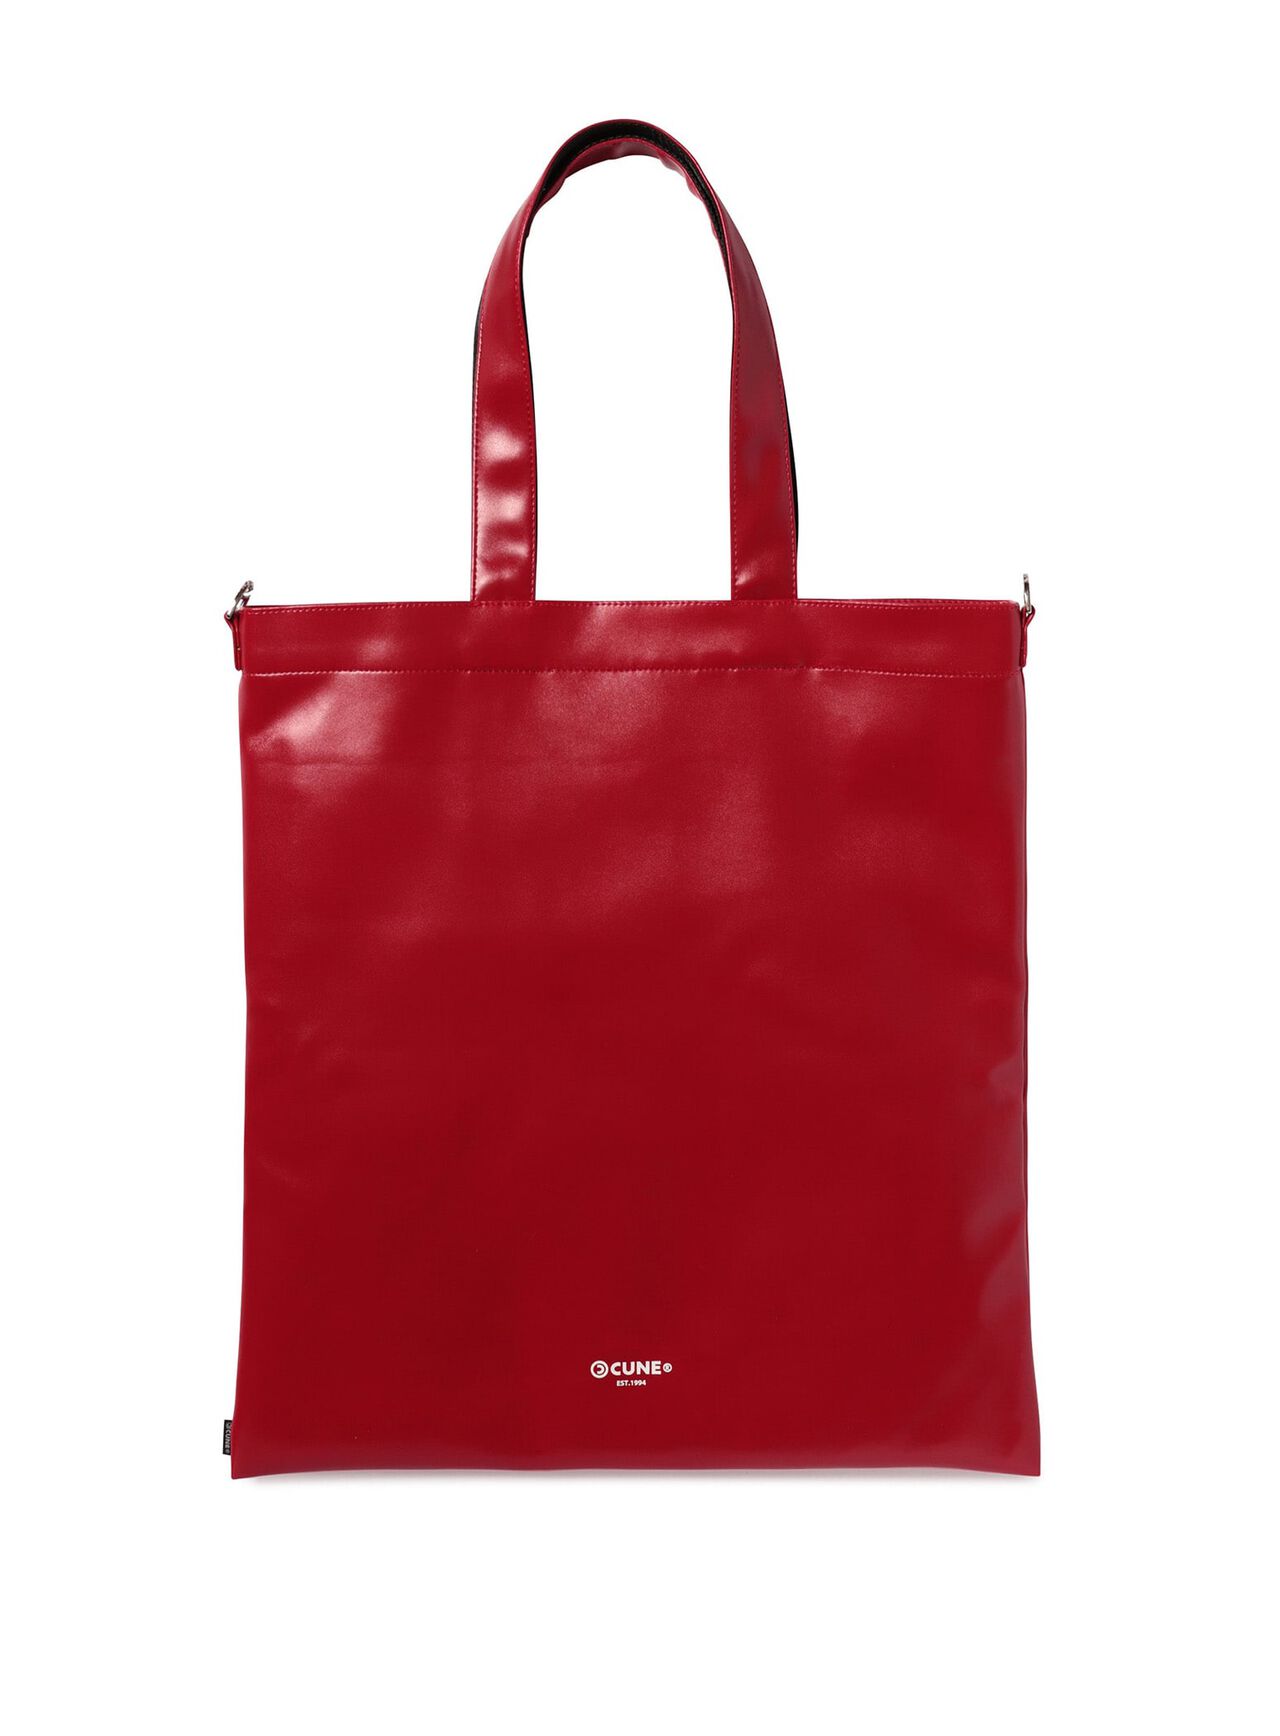 PVC tote bag,ONE, large image number 1